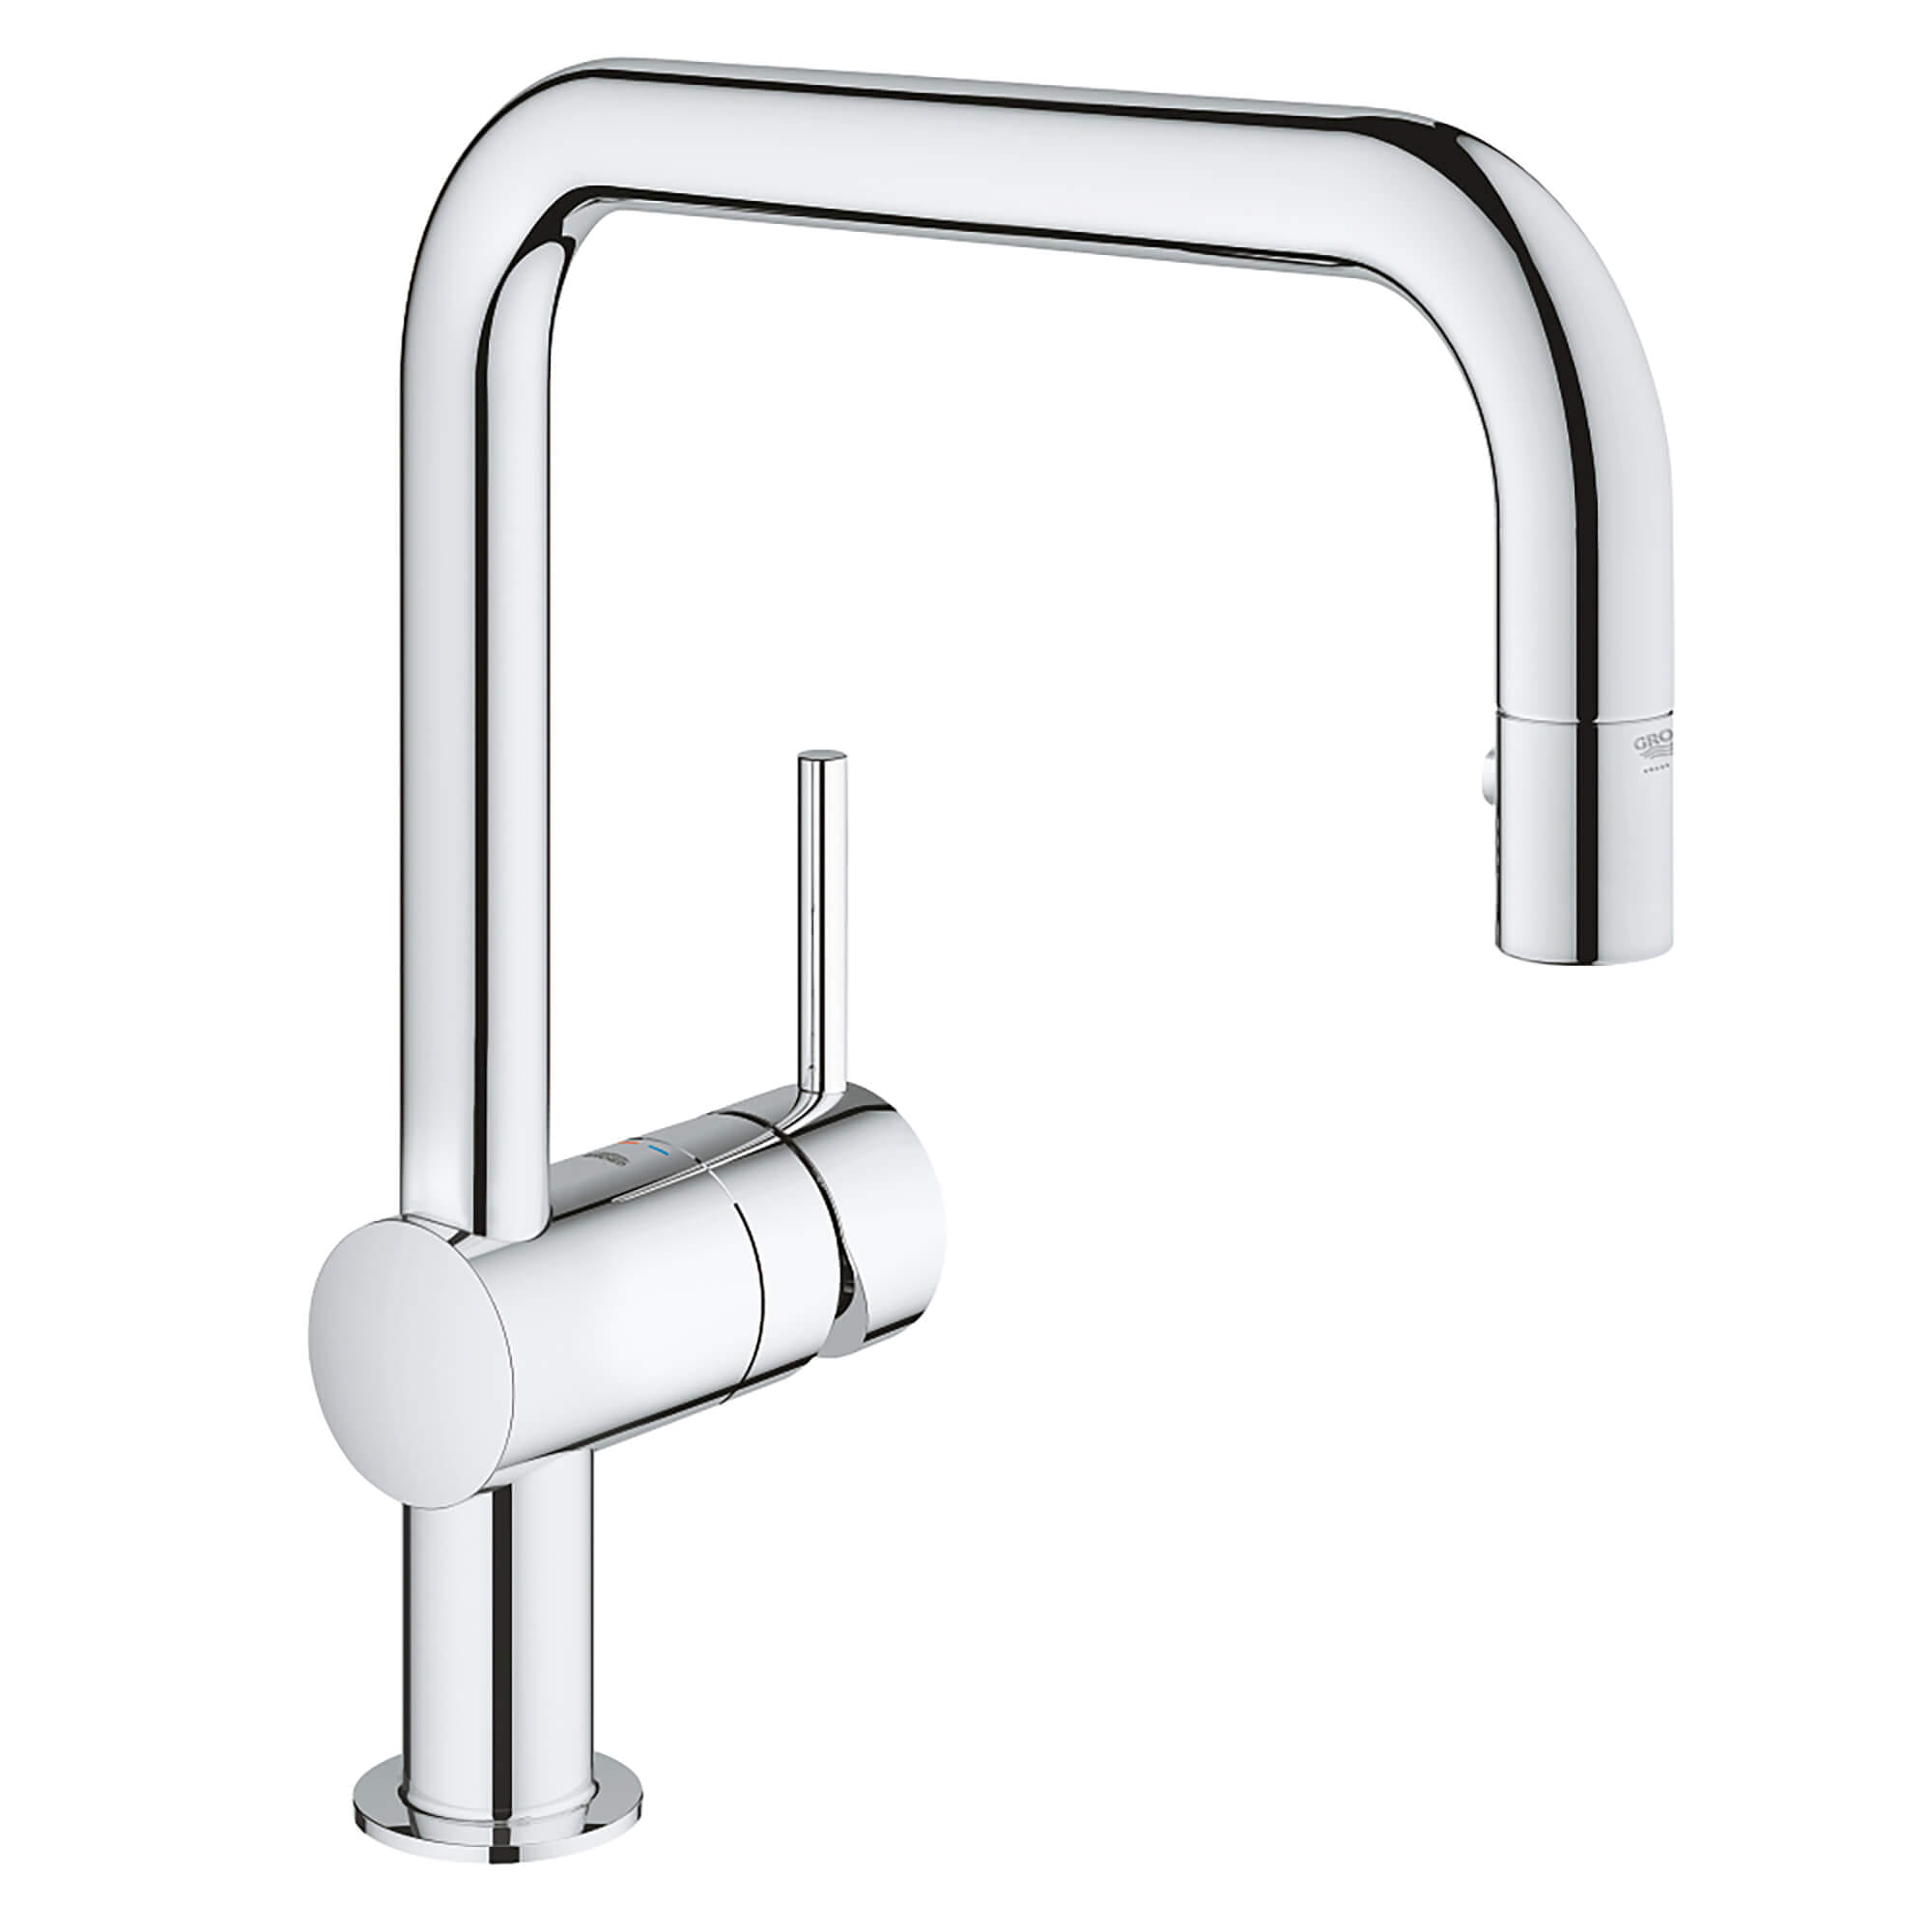 SINGLE-HANDLE PULL DOWN KITCHEN FAUCET DUAL SPRAY 1.75 GPM Model: 32319000-related